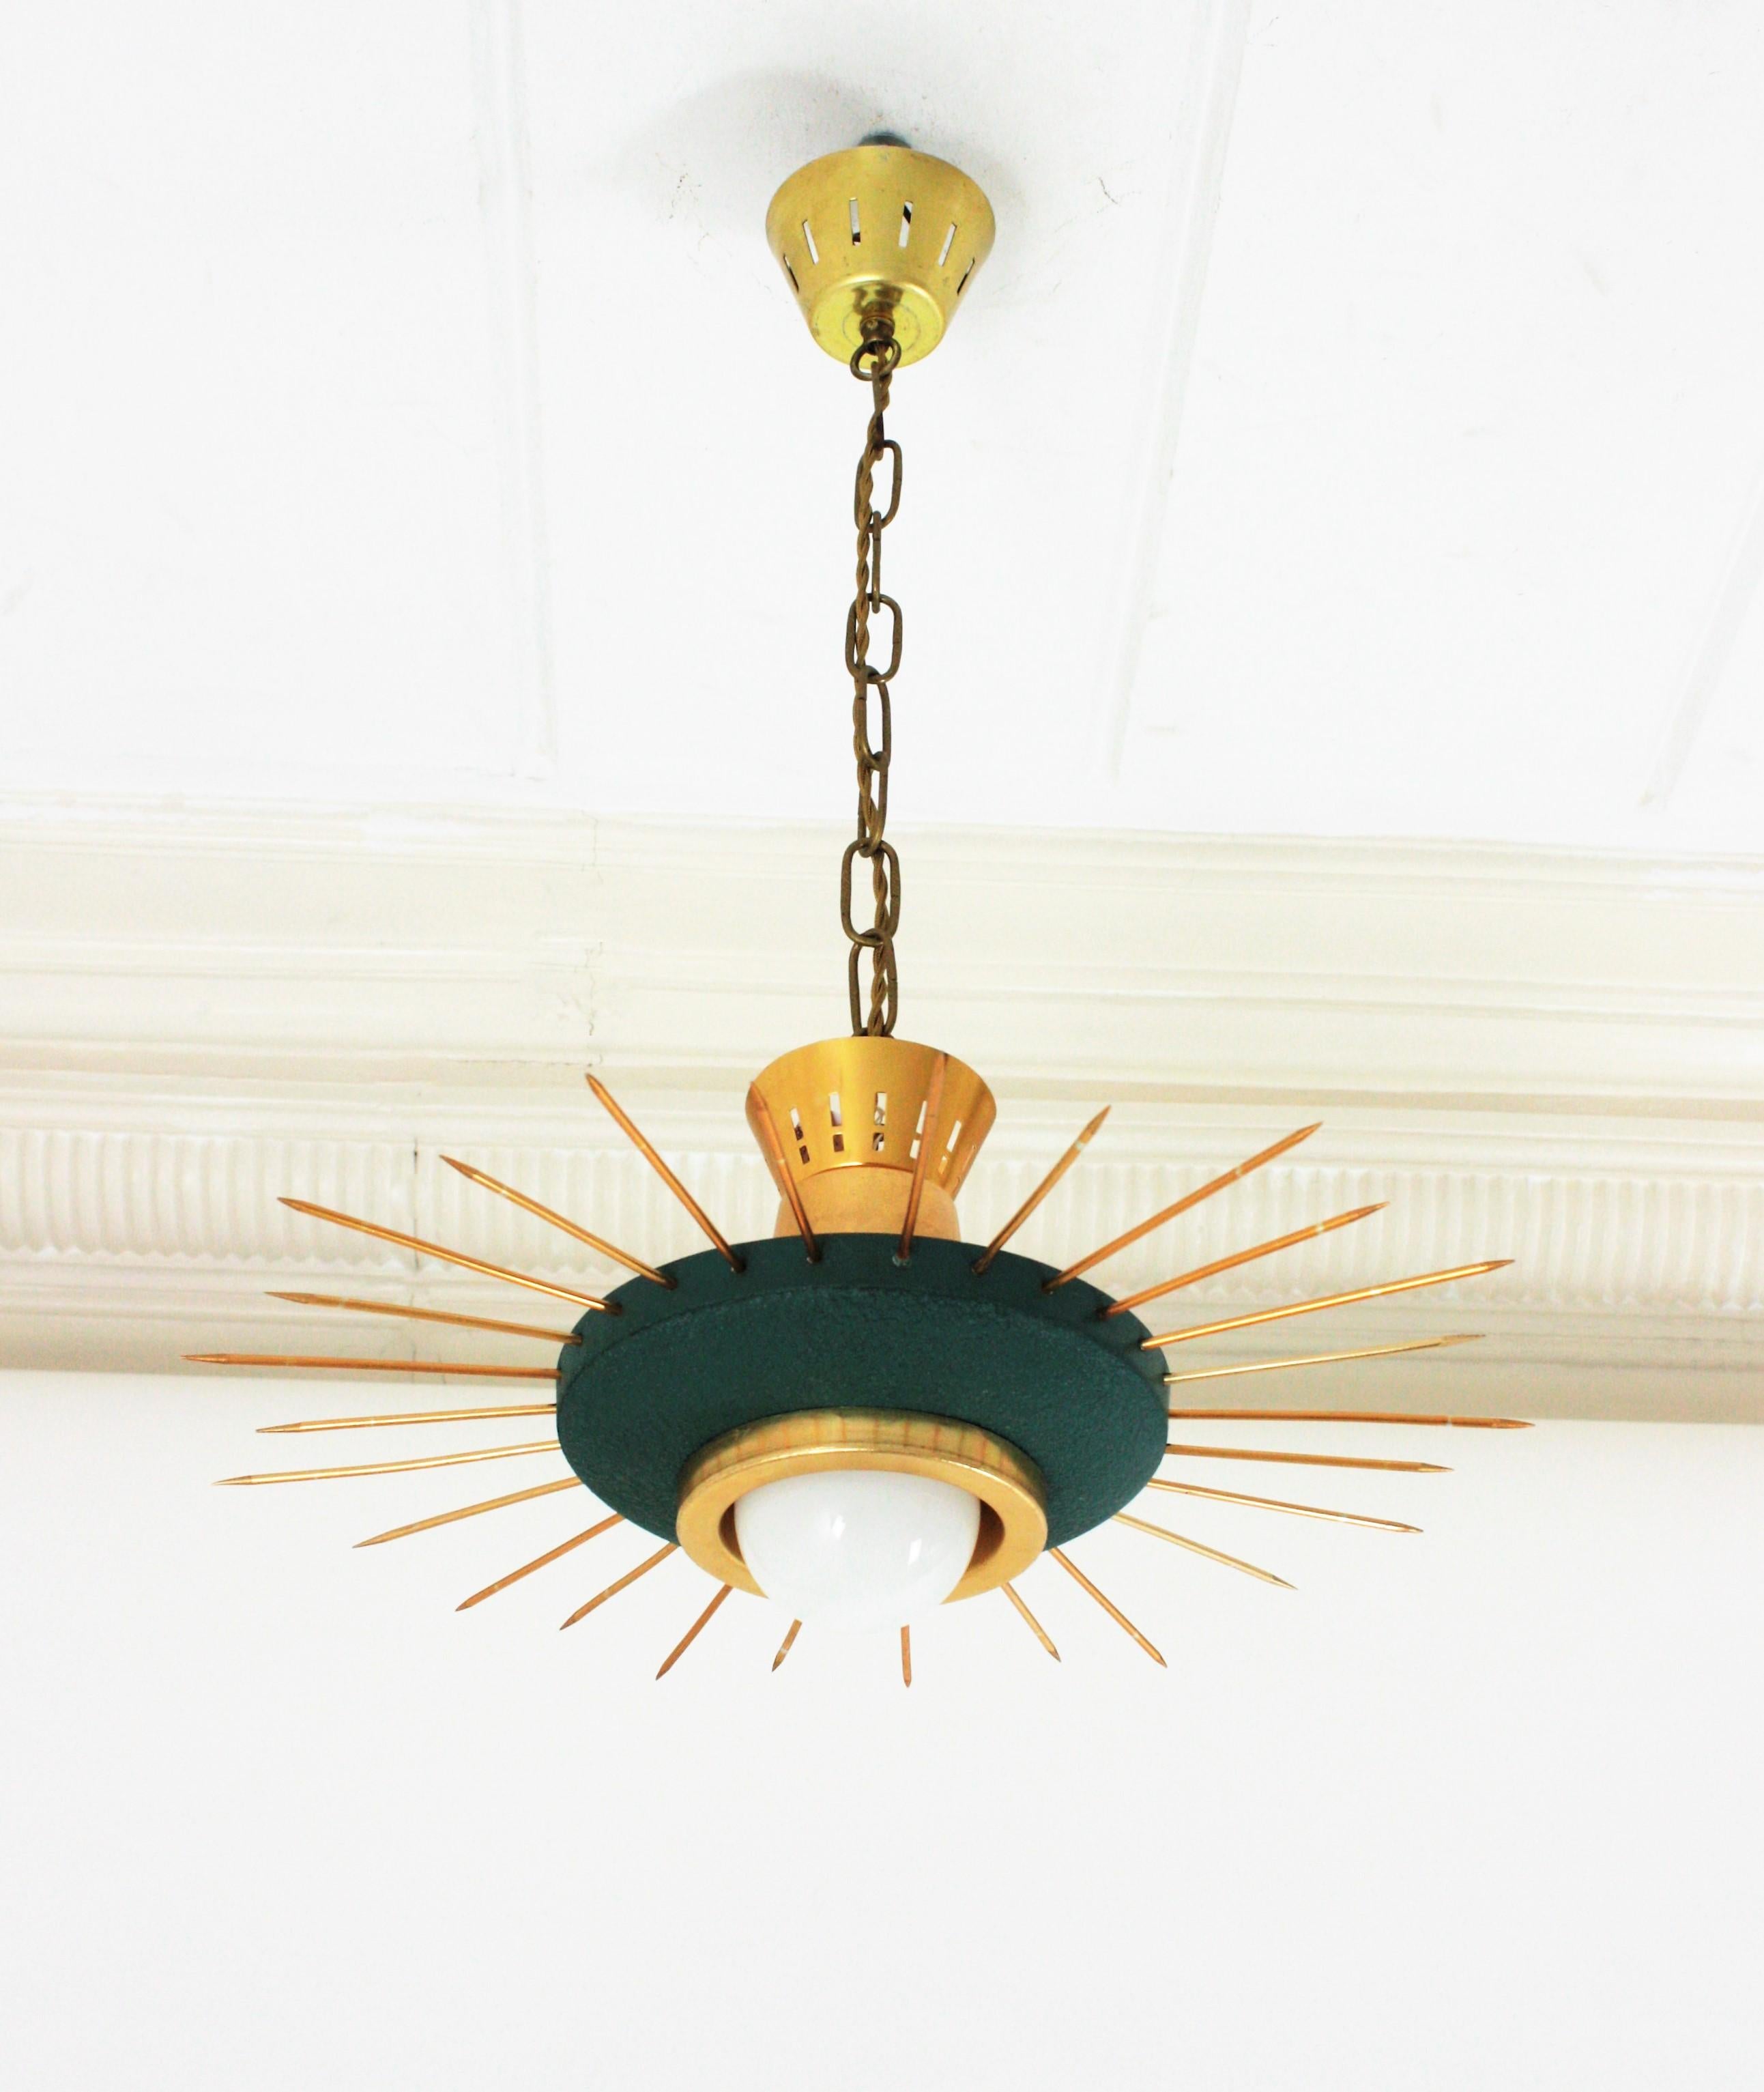 Mid-Century Modern green lacquered metal and brass sunburst suspension light, chandelier or light fixture, Italy, 1950s.
This eye-catching sunburst ceiling lamp features a green metal shade surrounded by brass spikes. It hangs from a brass chain